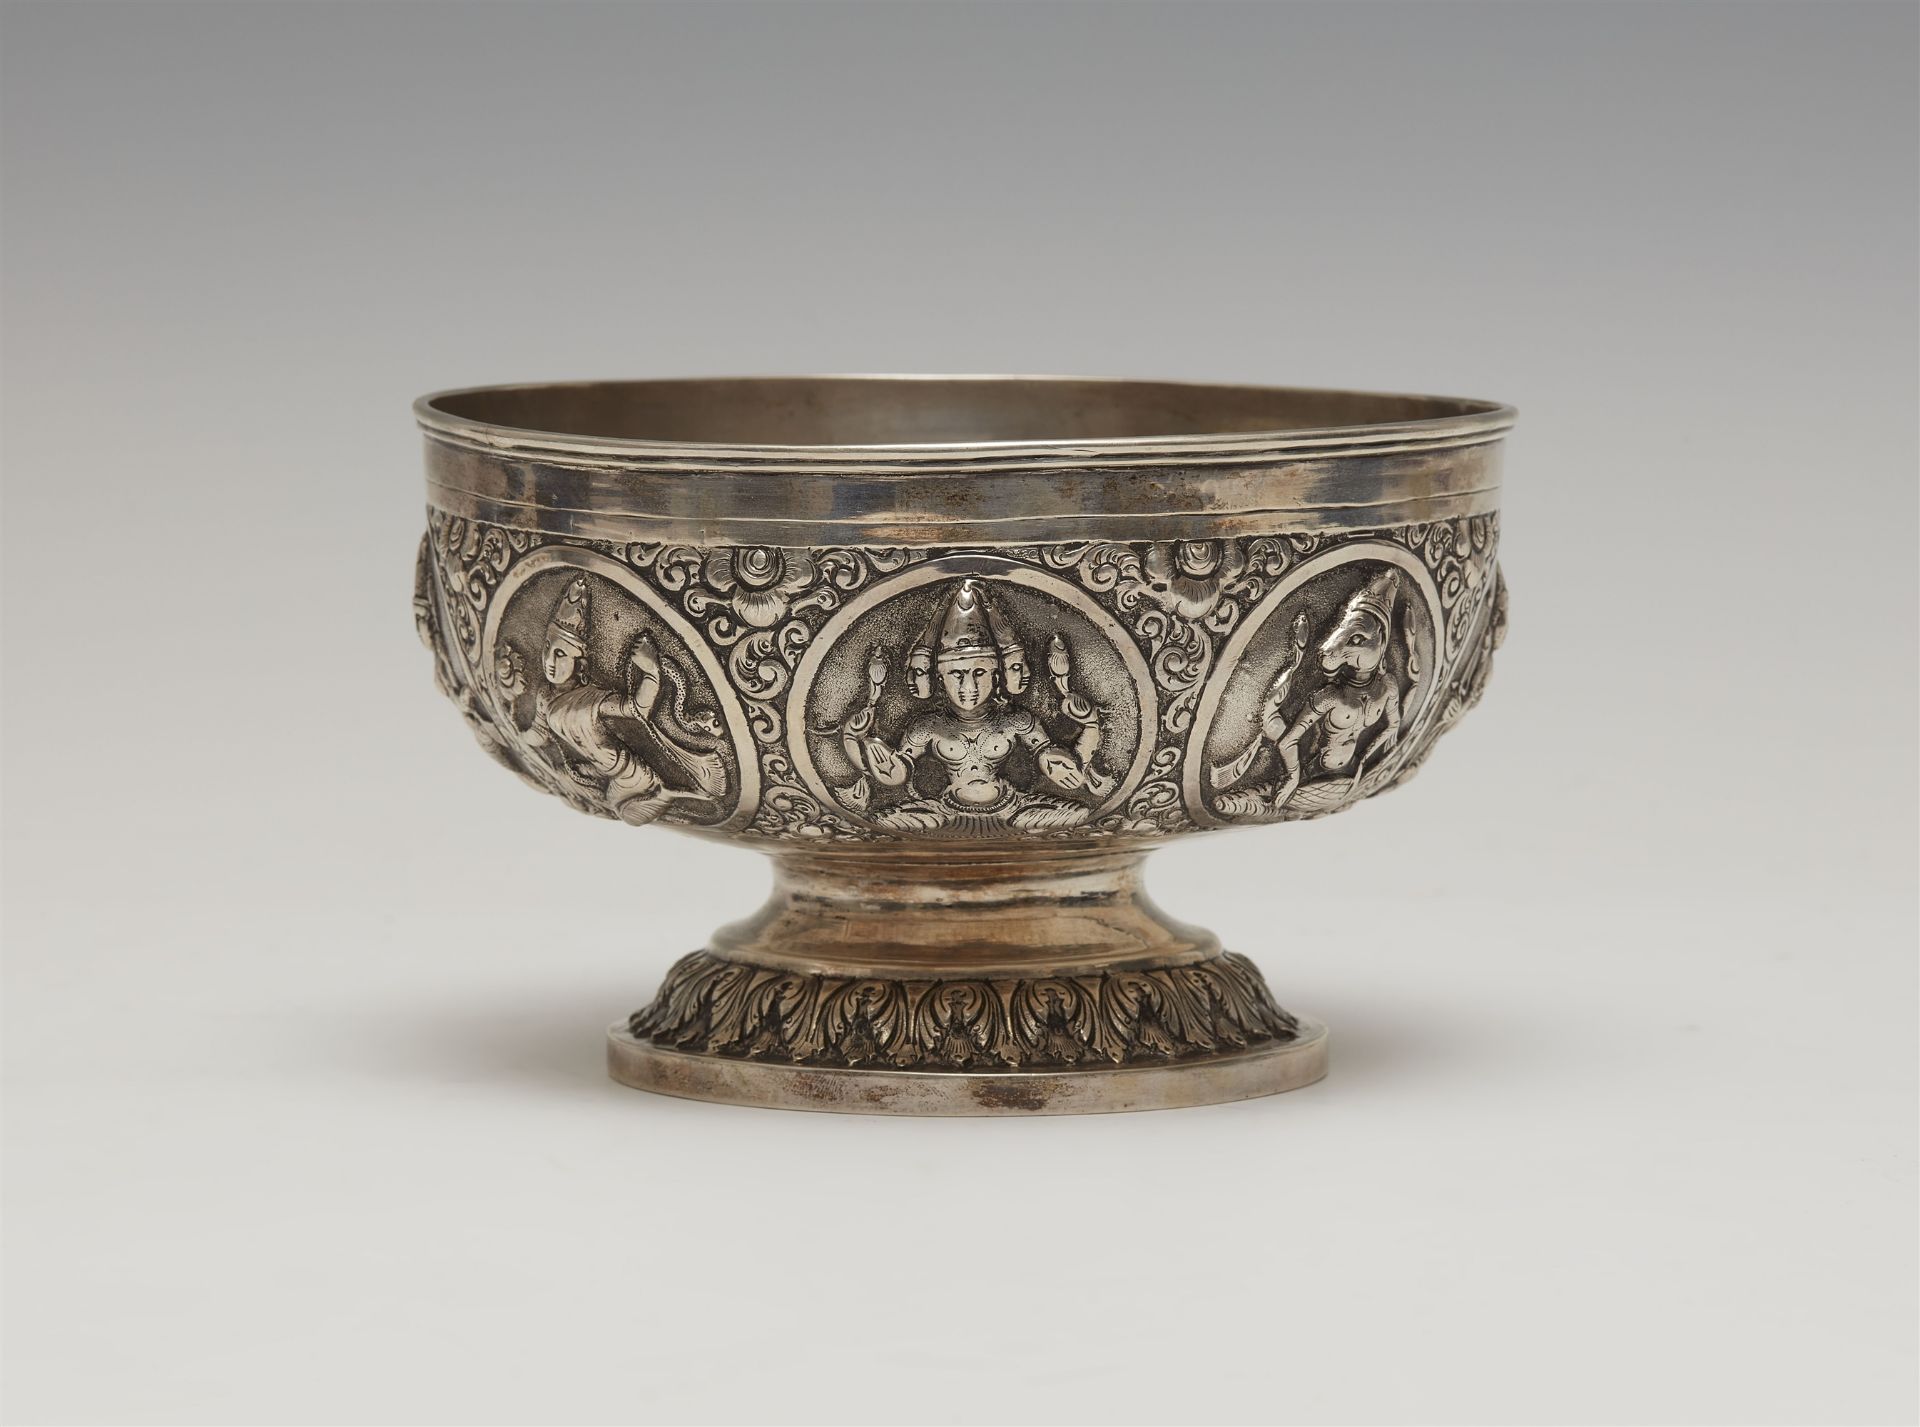 A Lucknow or Madras silver swami pattern silver pedestal rose bowl. India. Late 19th century